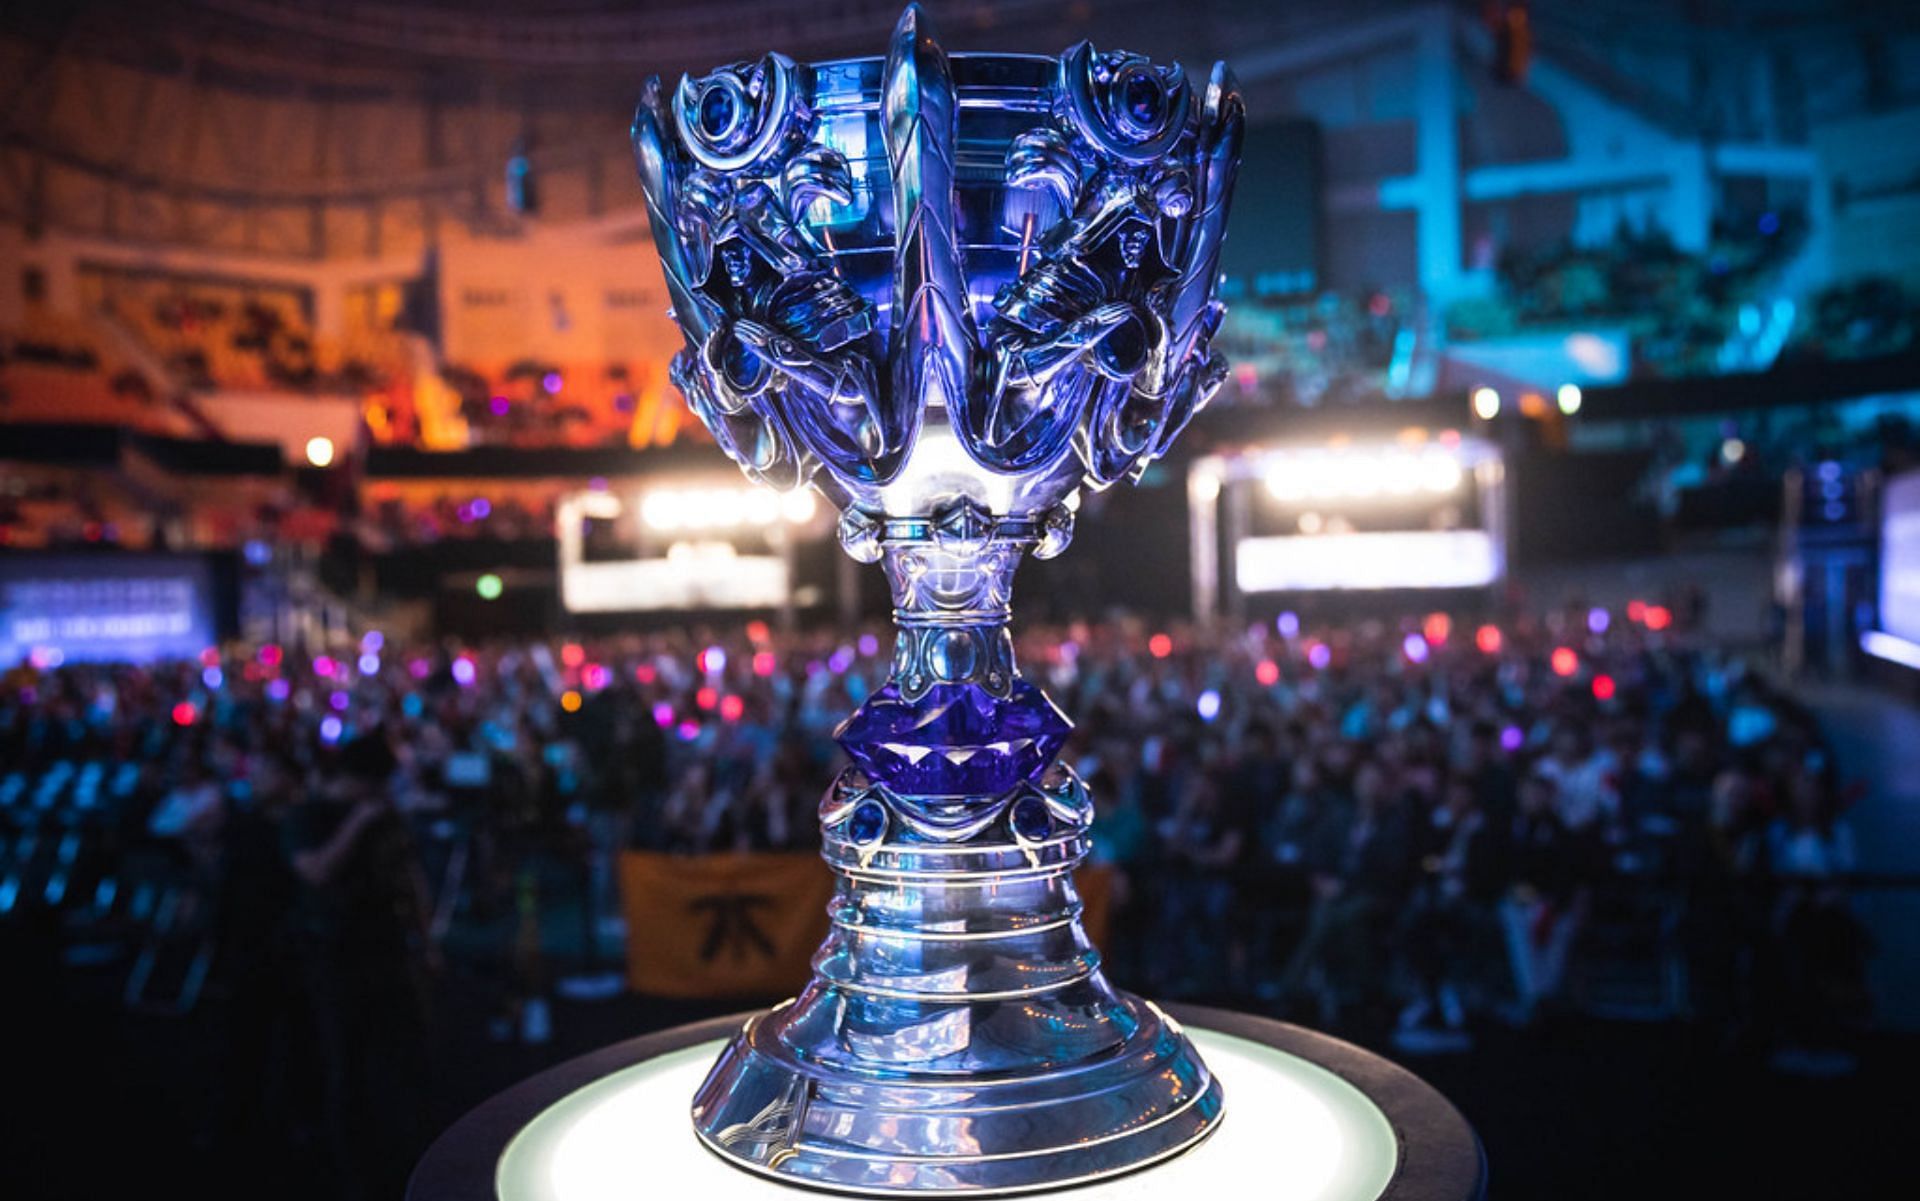 Tiffany & Co is redesigning the esports trophy for Worlds